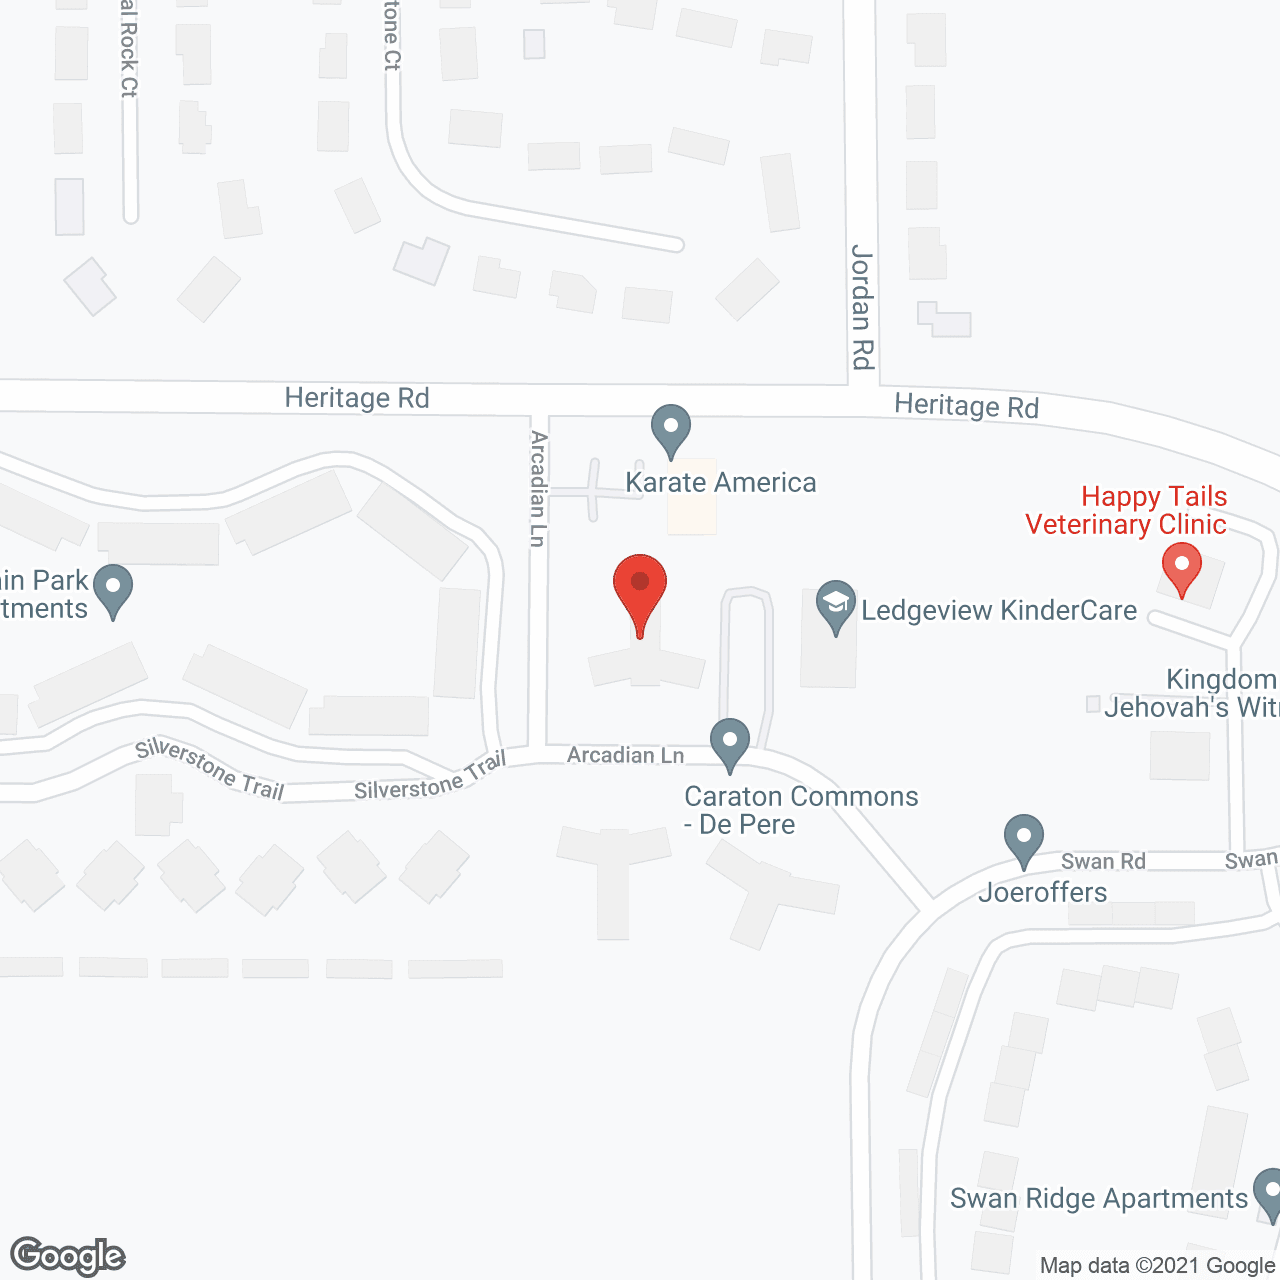 Caraton Commons on Arcadian #3 in google map